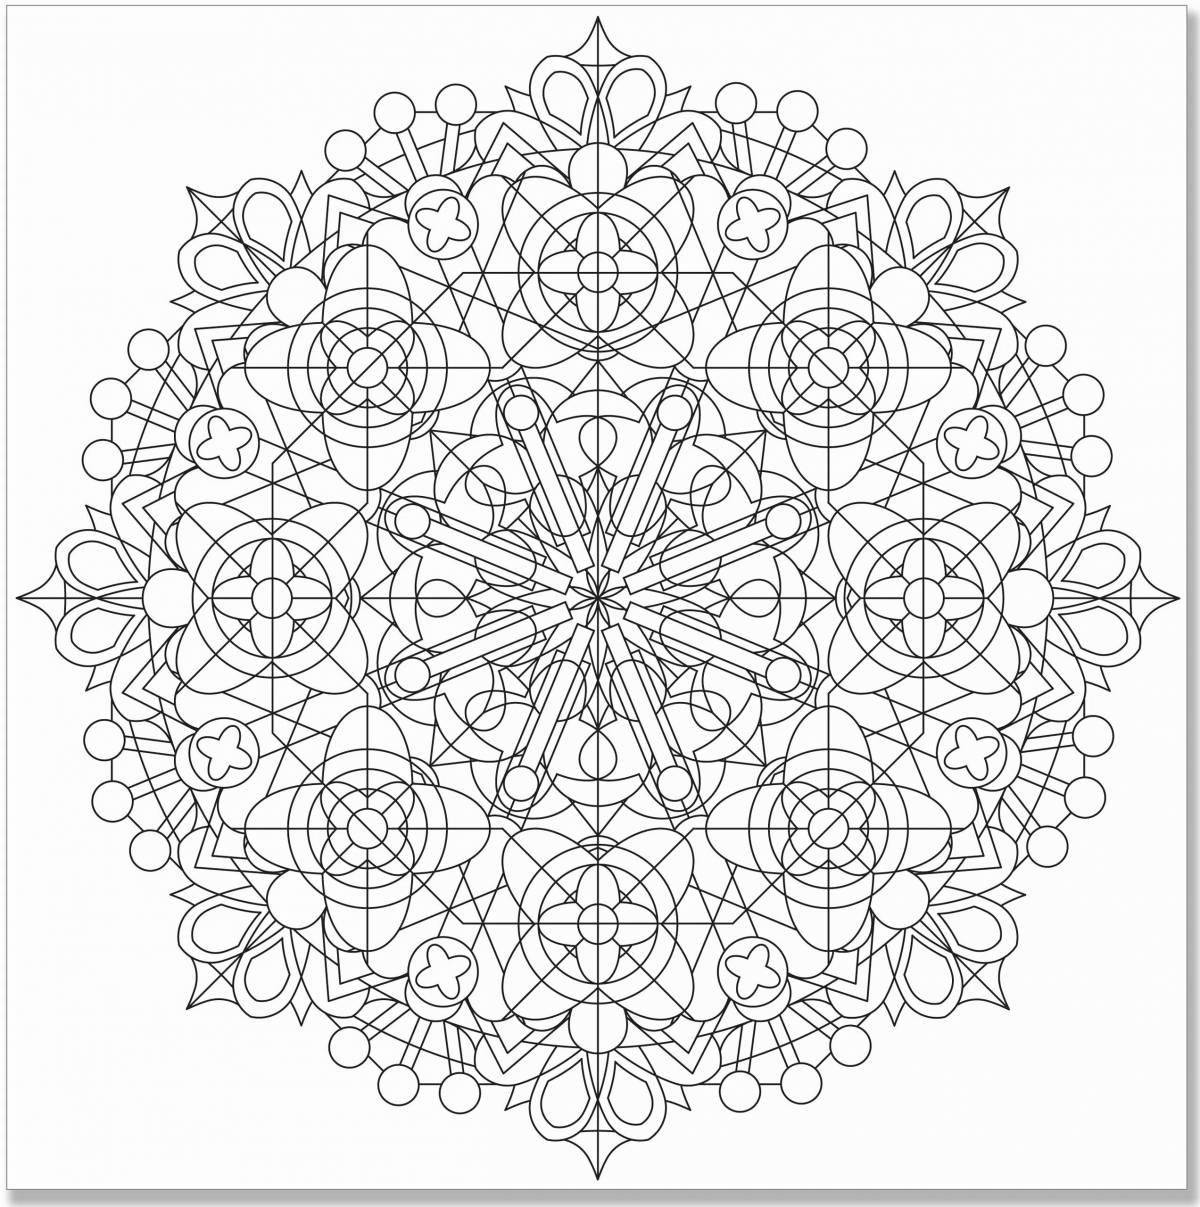 Kaleidoscope animated coloring page